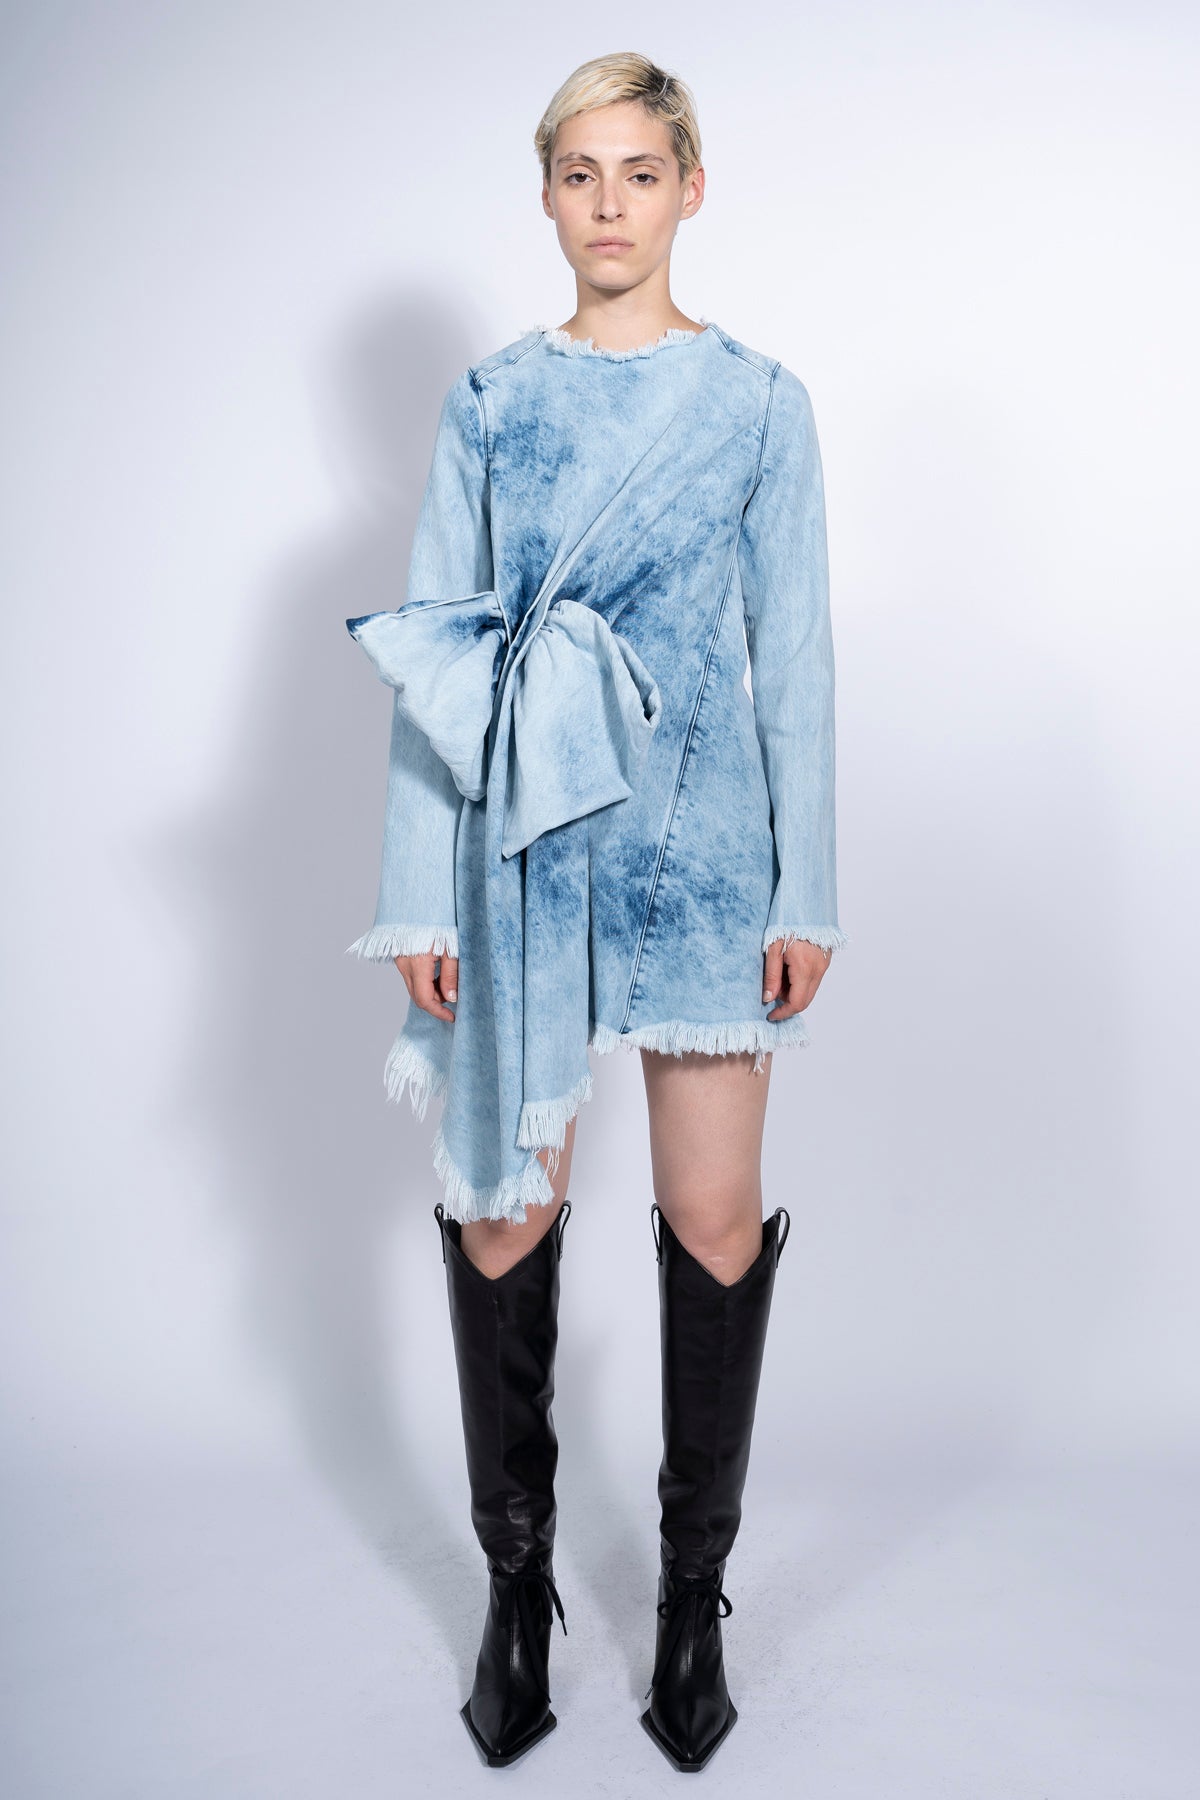 BLUE JANIS DRESS WITH FRONT PLEATS marques almeida